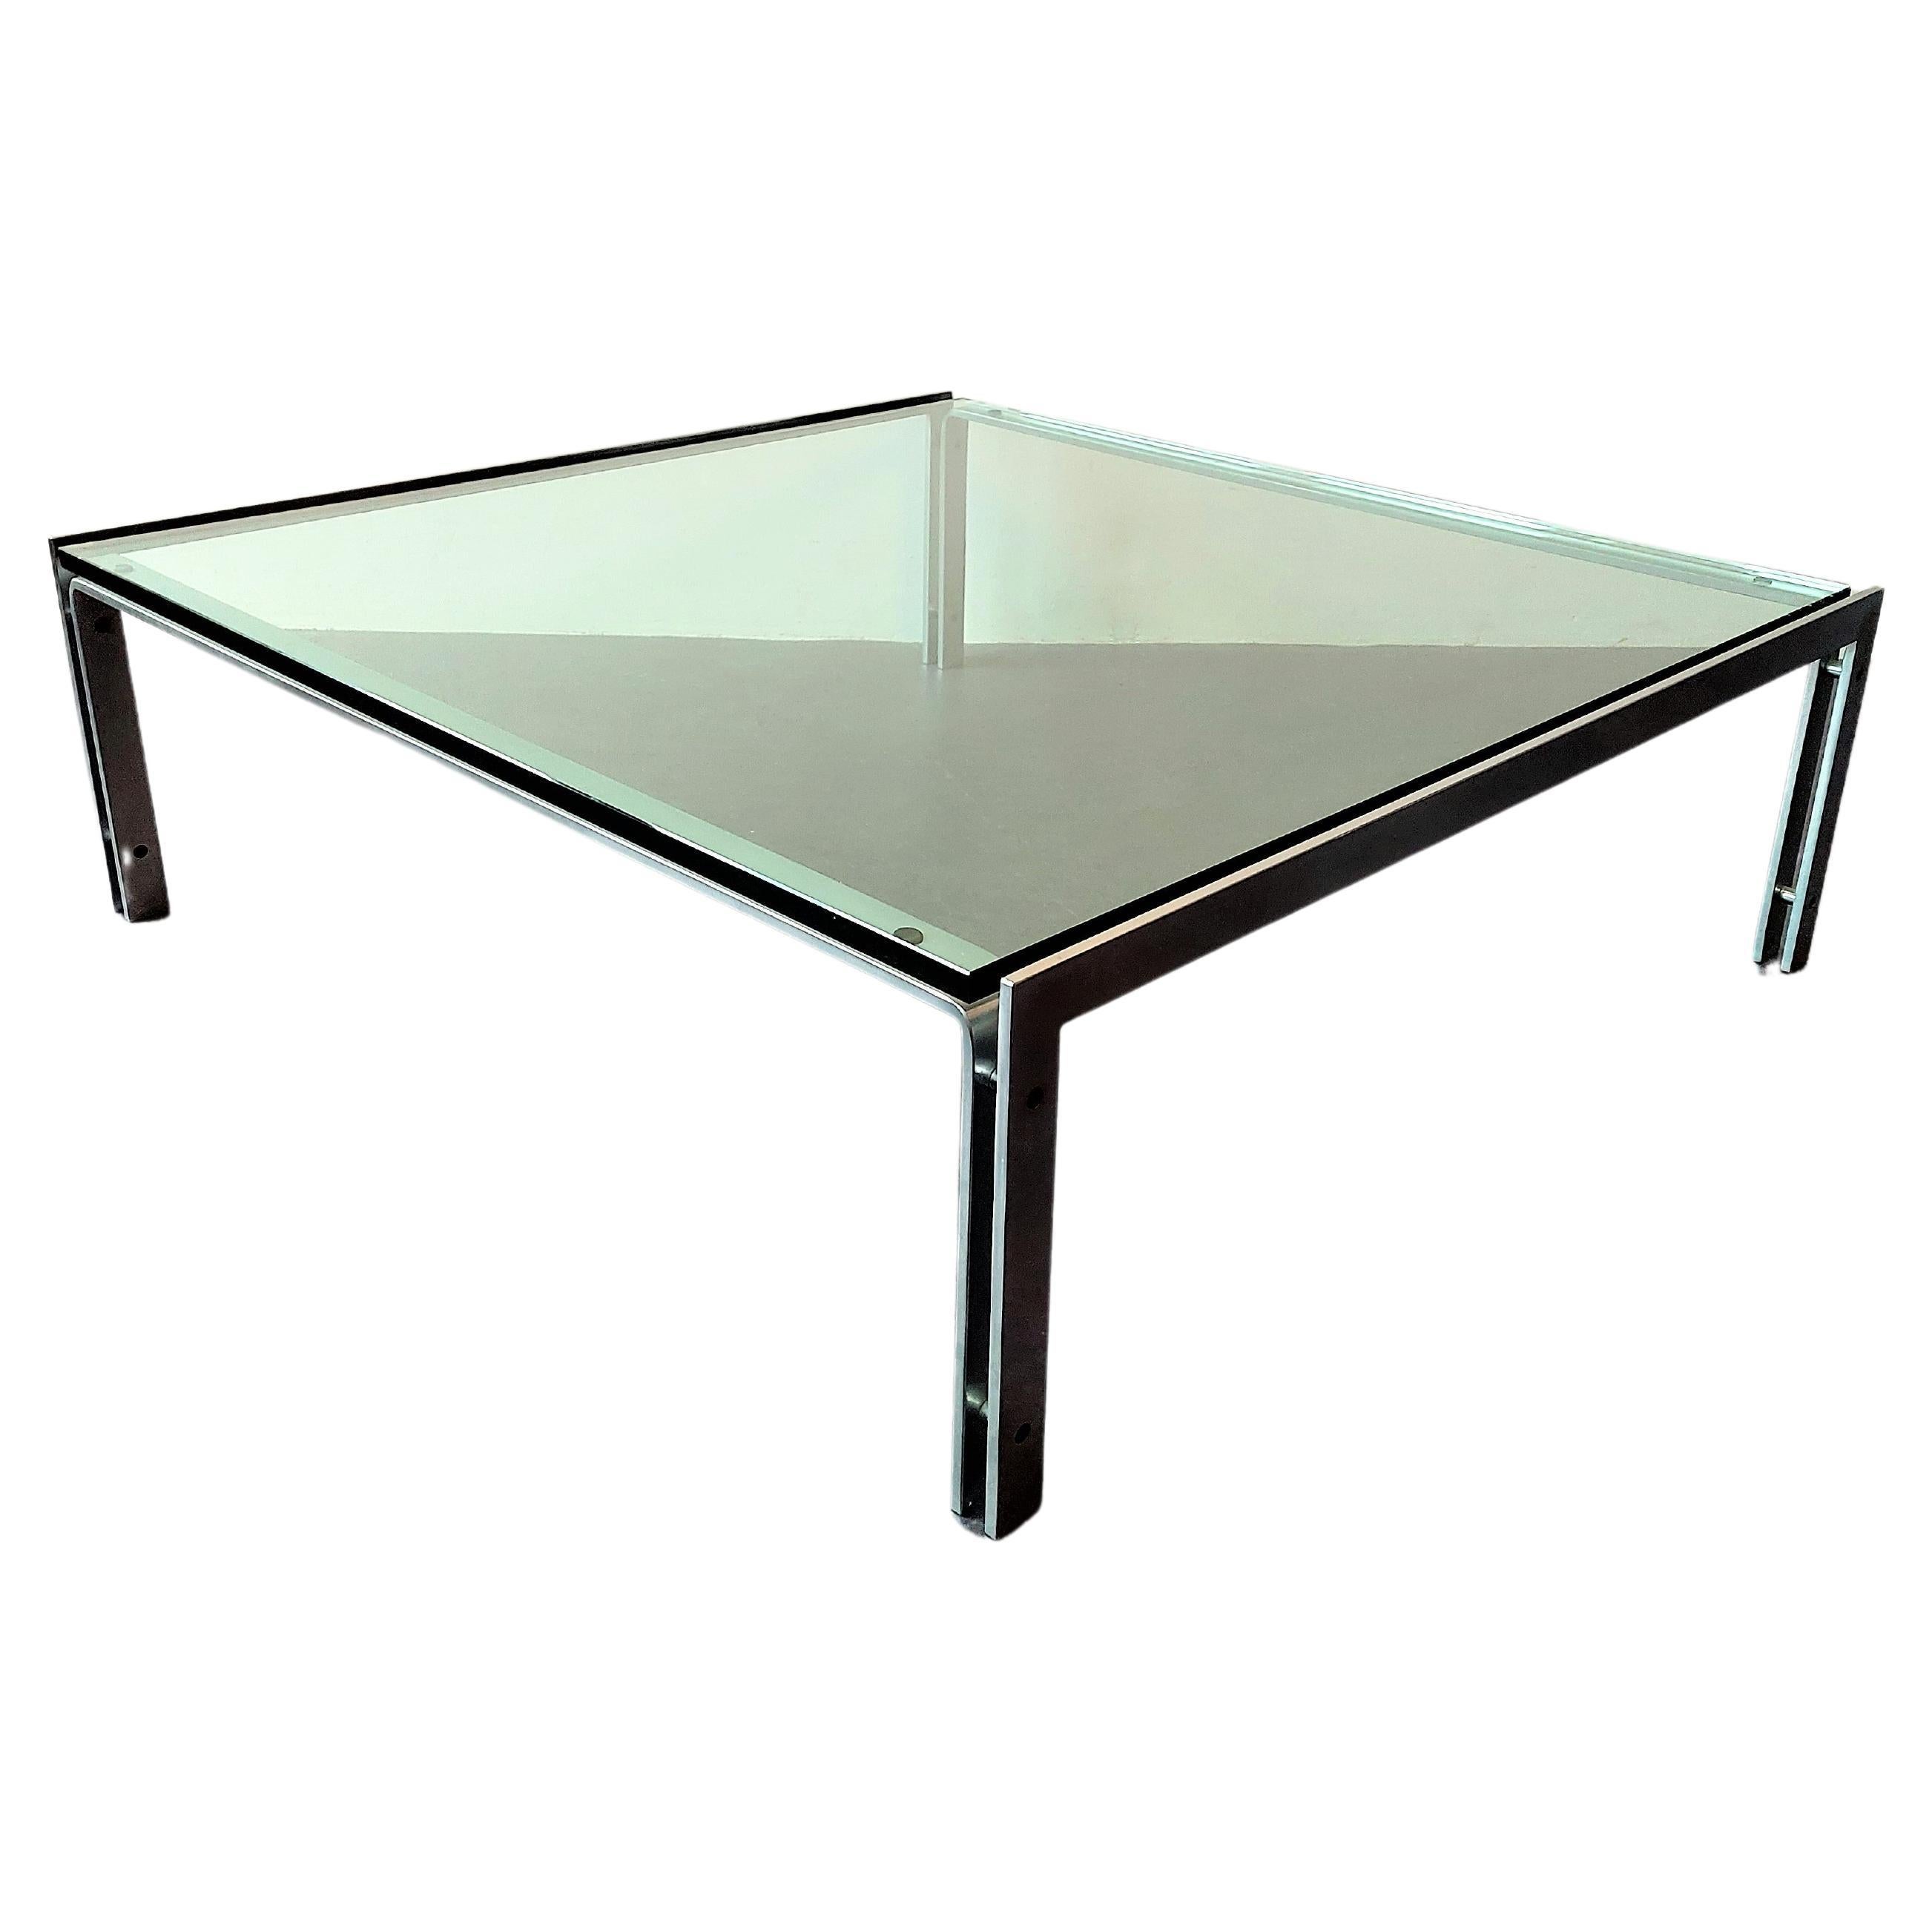 Large Steel and Glass M1 Coffee Table by Hank Kwint for Metaform, 1980's